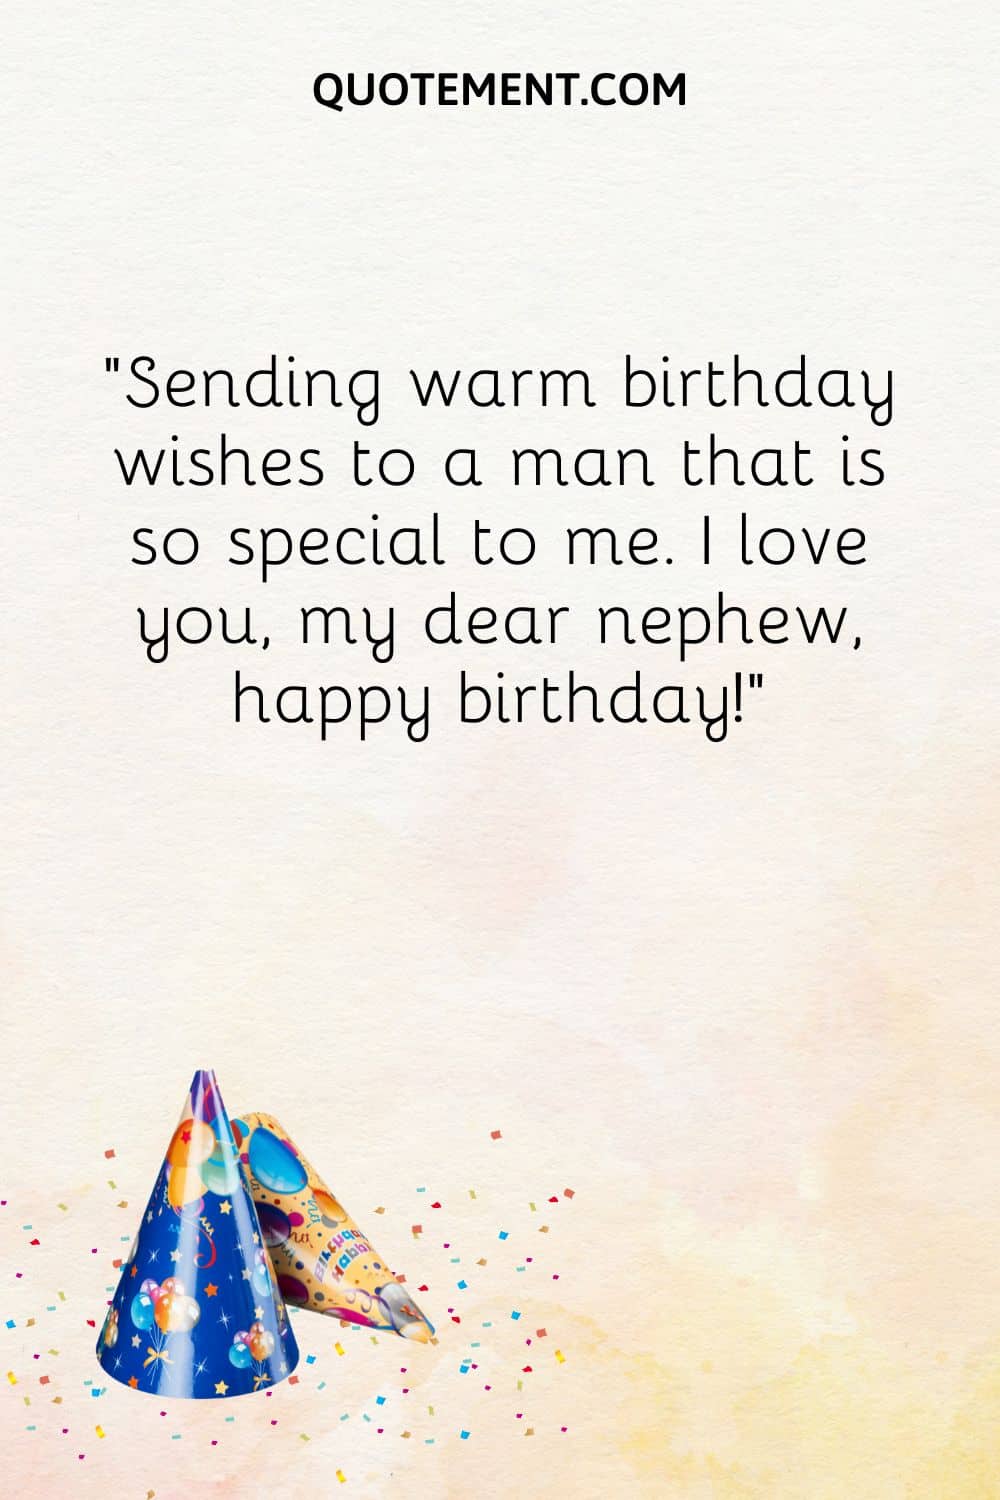 “Sending warm birthday wishes to a man that is so special to me. I love you, my dear nephew, happy birthday!”